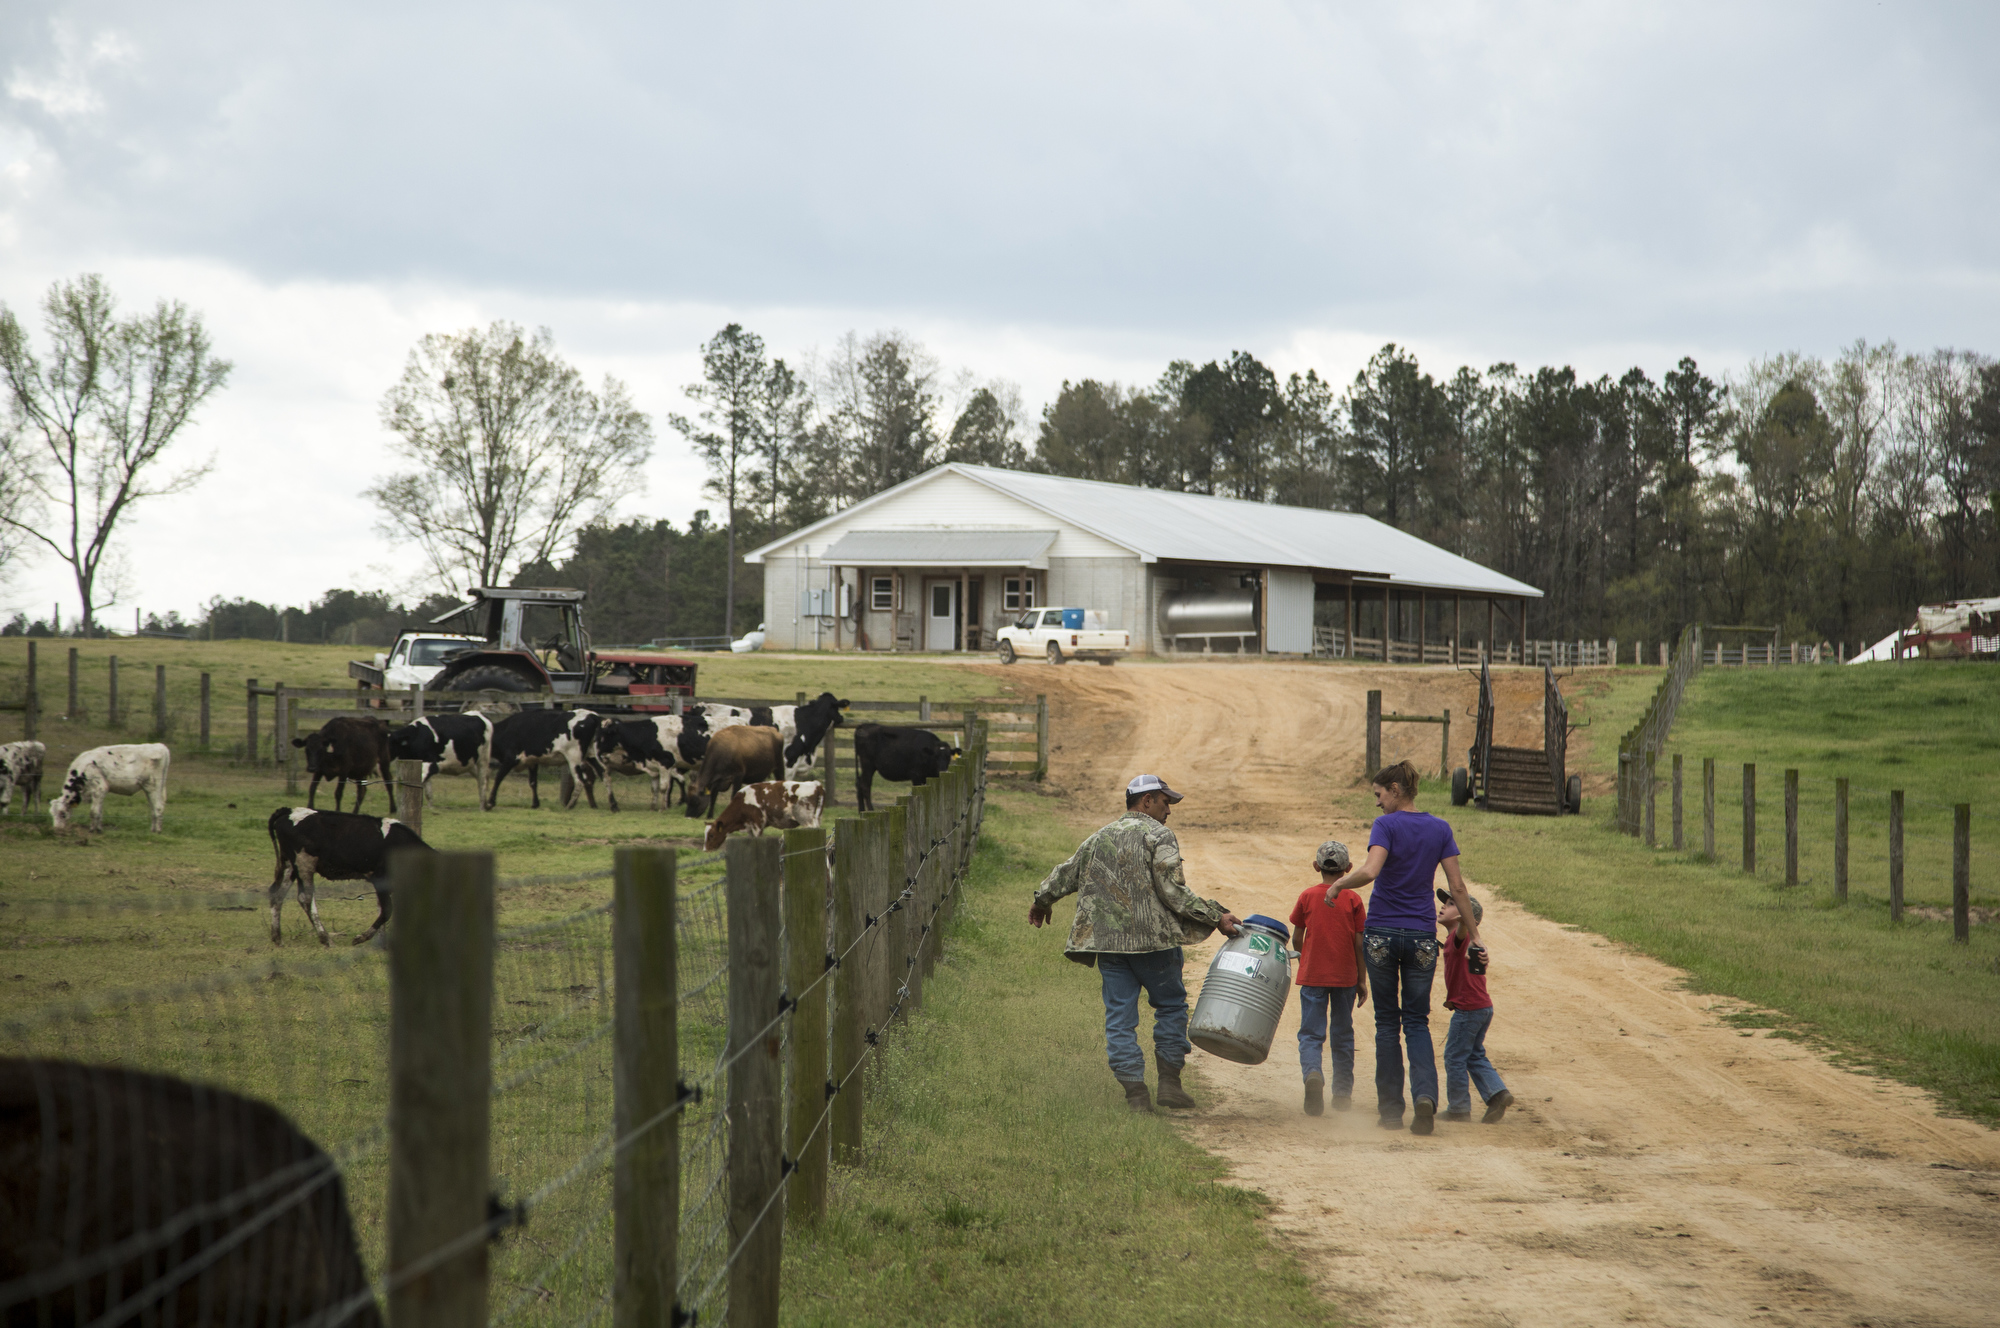  Jeff, Alex, 9, Jana and Dominic Busciglio, 5, walk up the hill towards the new dairy barn, after all the cows had been moved from Tampa to the property in Gay, Georgia, on March 27, 2017. It took four 18-wheelers to move the 160 cow herd. After arri